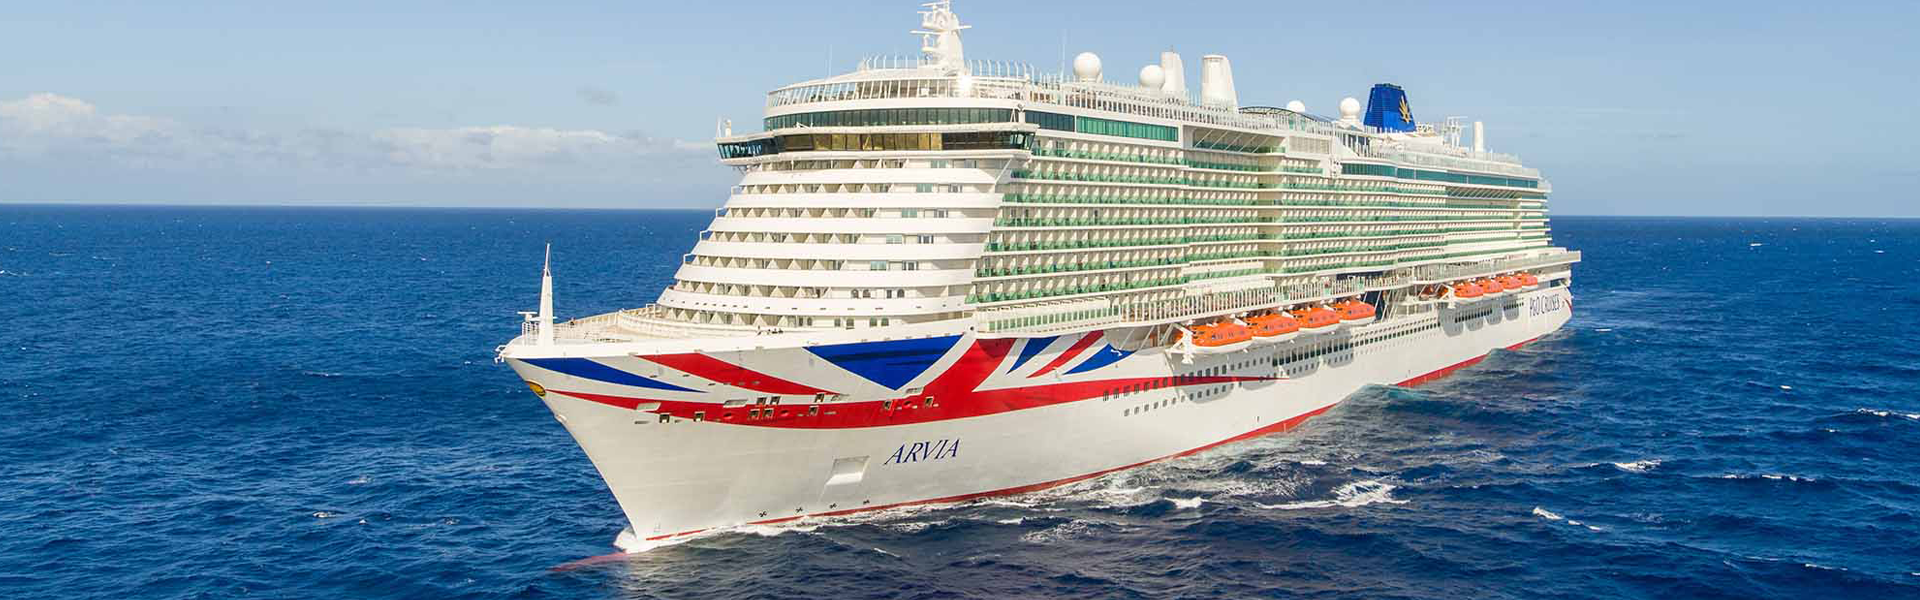 Discover the big art cities  aboard of P&O Cruises’ ships